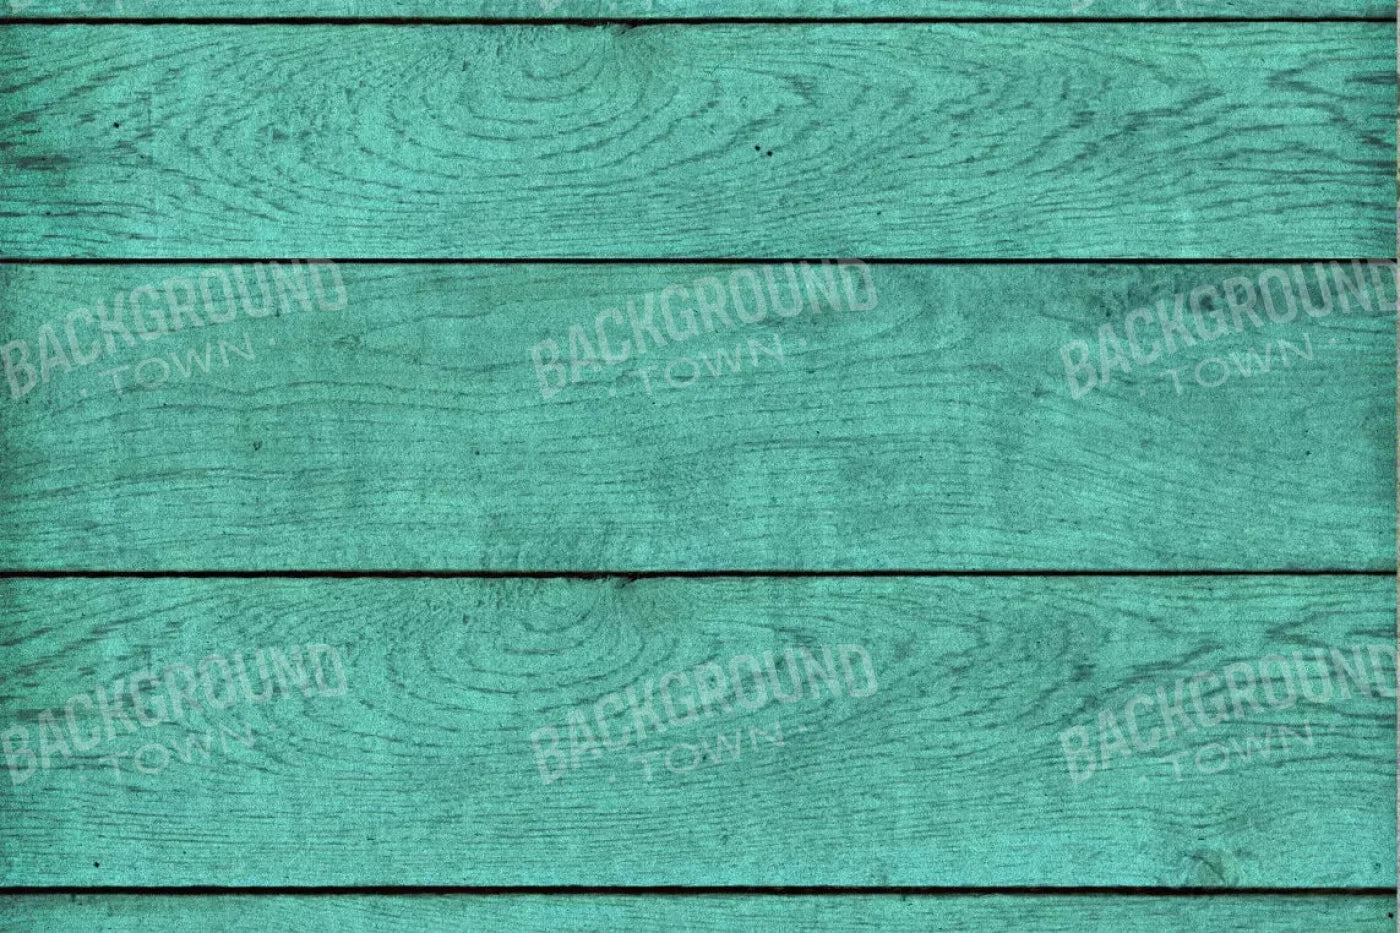 Boarded Teal 8X5 Ultracloth ( 96 X 60 Inch ) Backdrop